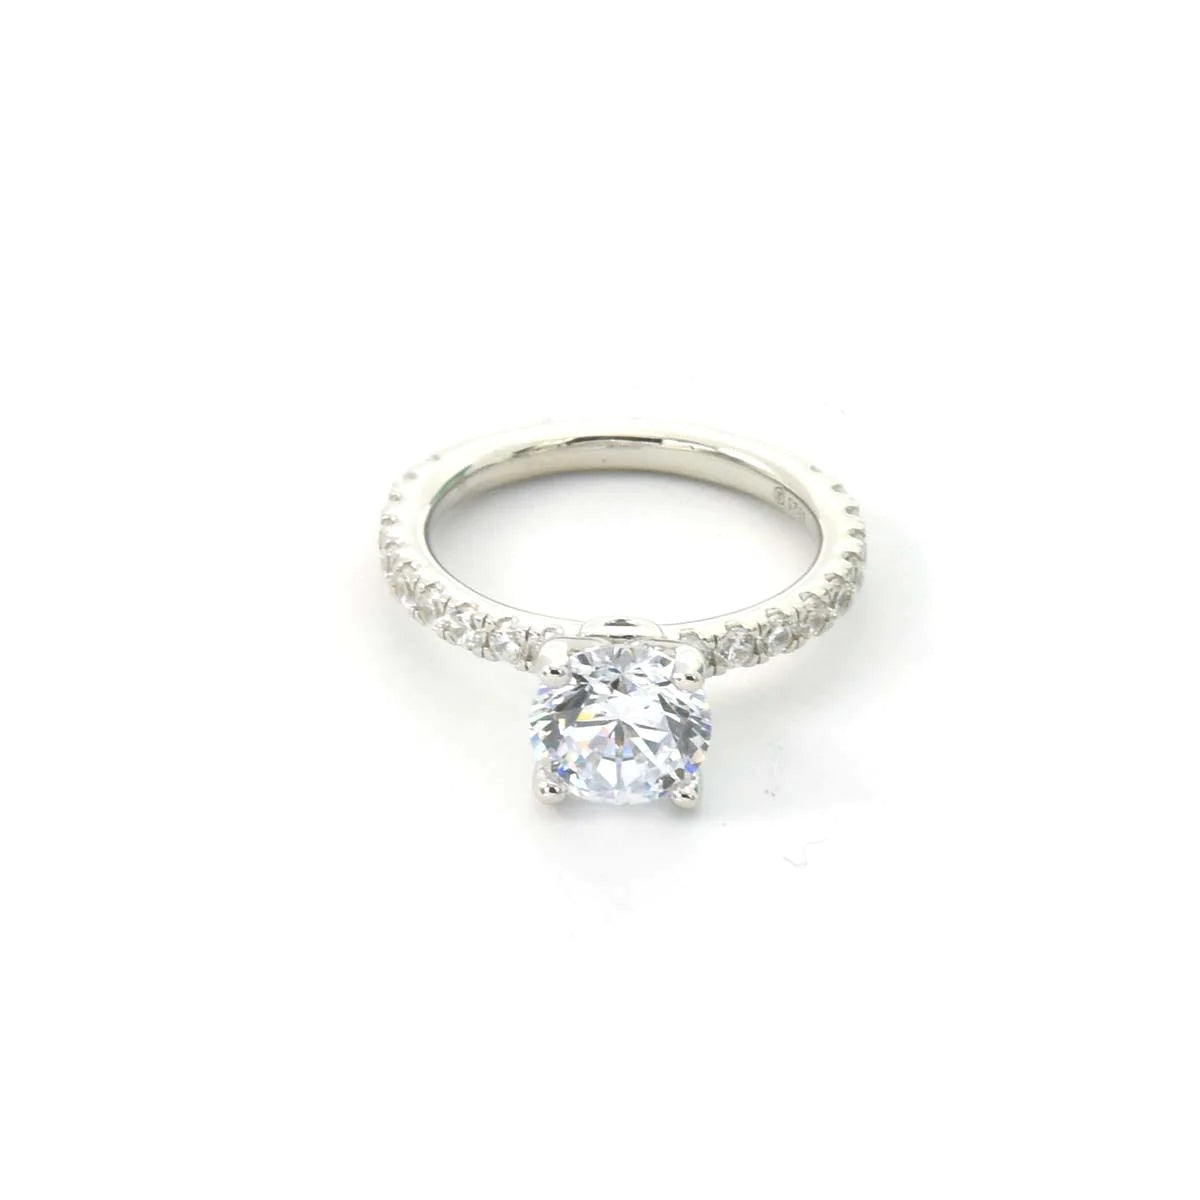 2.5 ct Cz Solitaire Engagement Ring